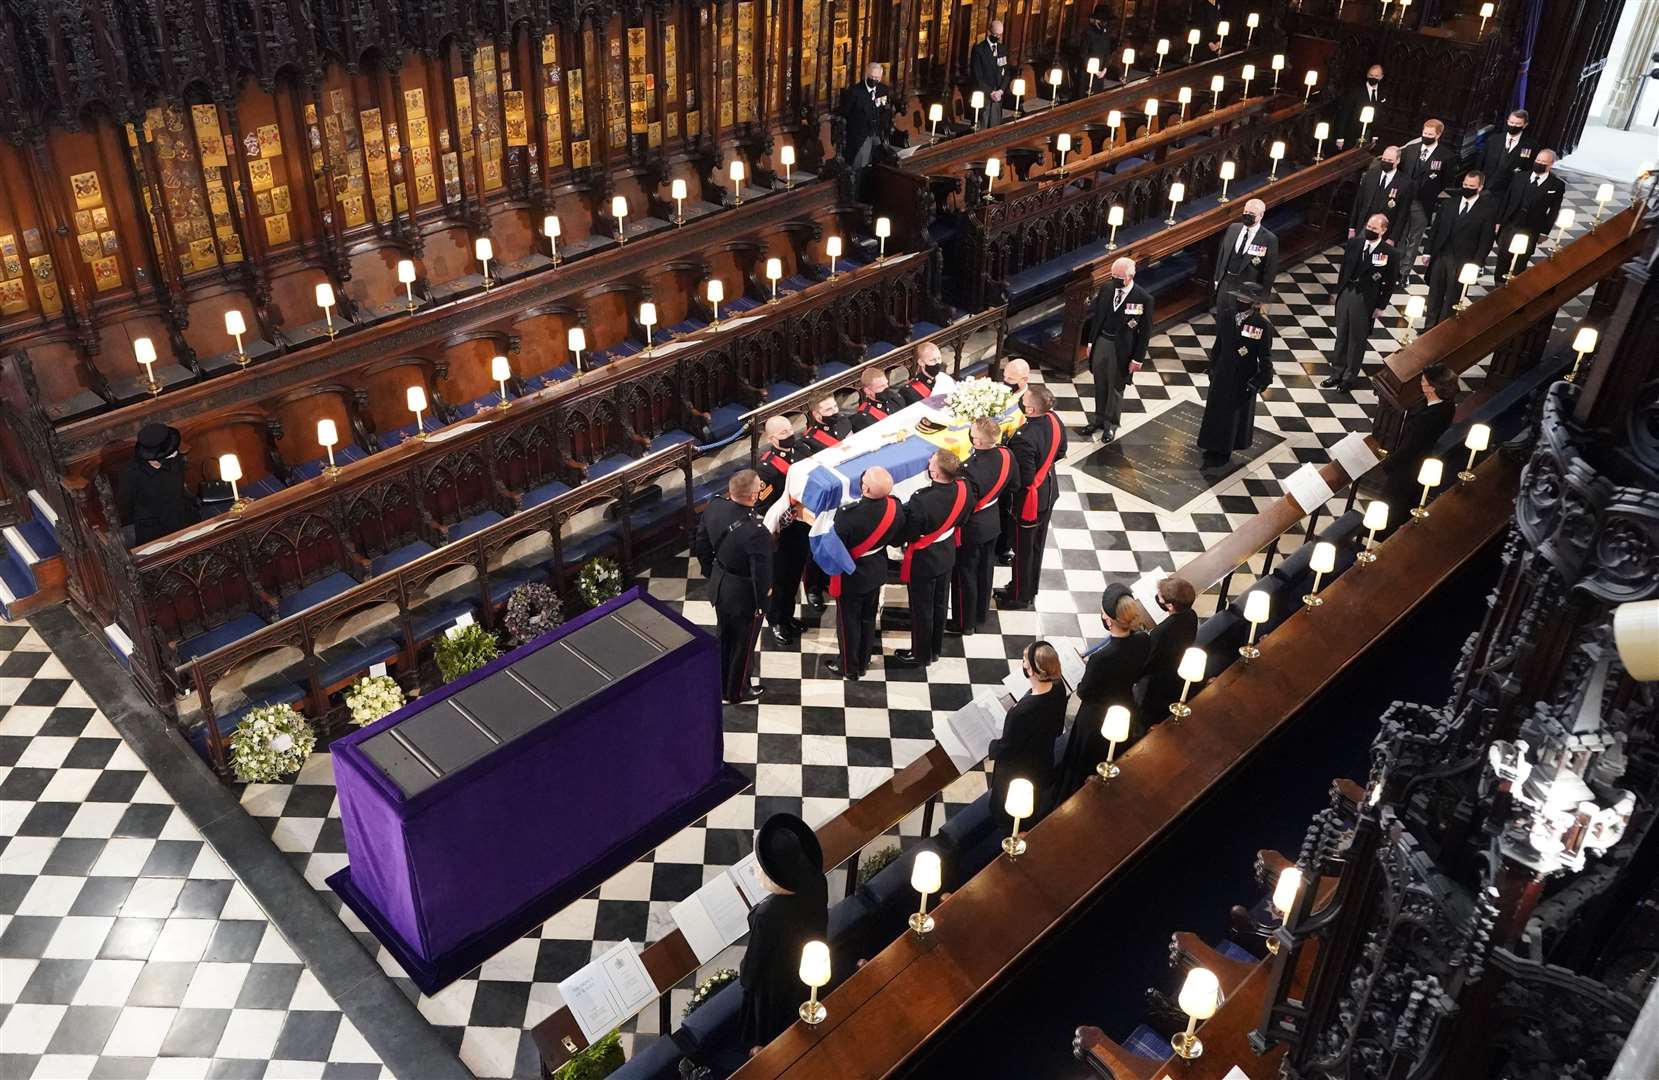 The Queen watches as pallbearers carry the coffin of the Duke of Edinburgh into St George’s Chapel (Dominic Lipinski/PA)